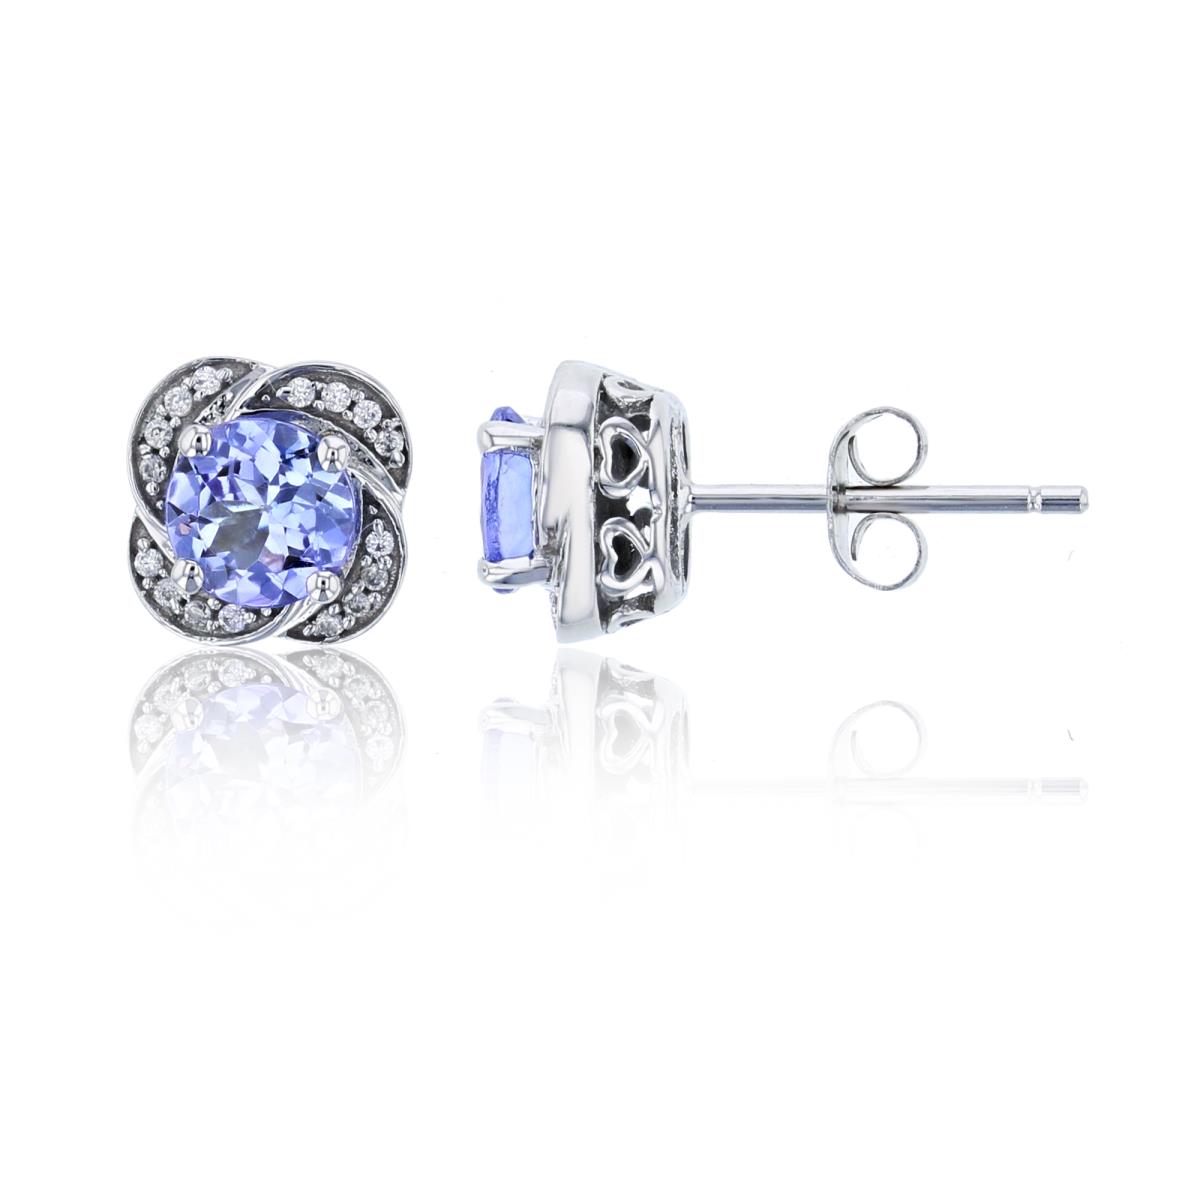 10K White Gold 0.10 CTTW Rnd Diamond & Rnd Tanzanite Flower Stud Earring with Silicon Backs